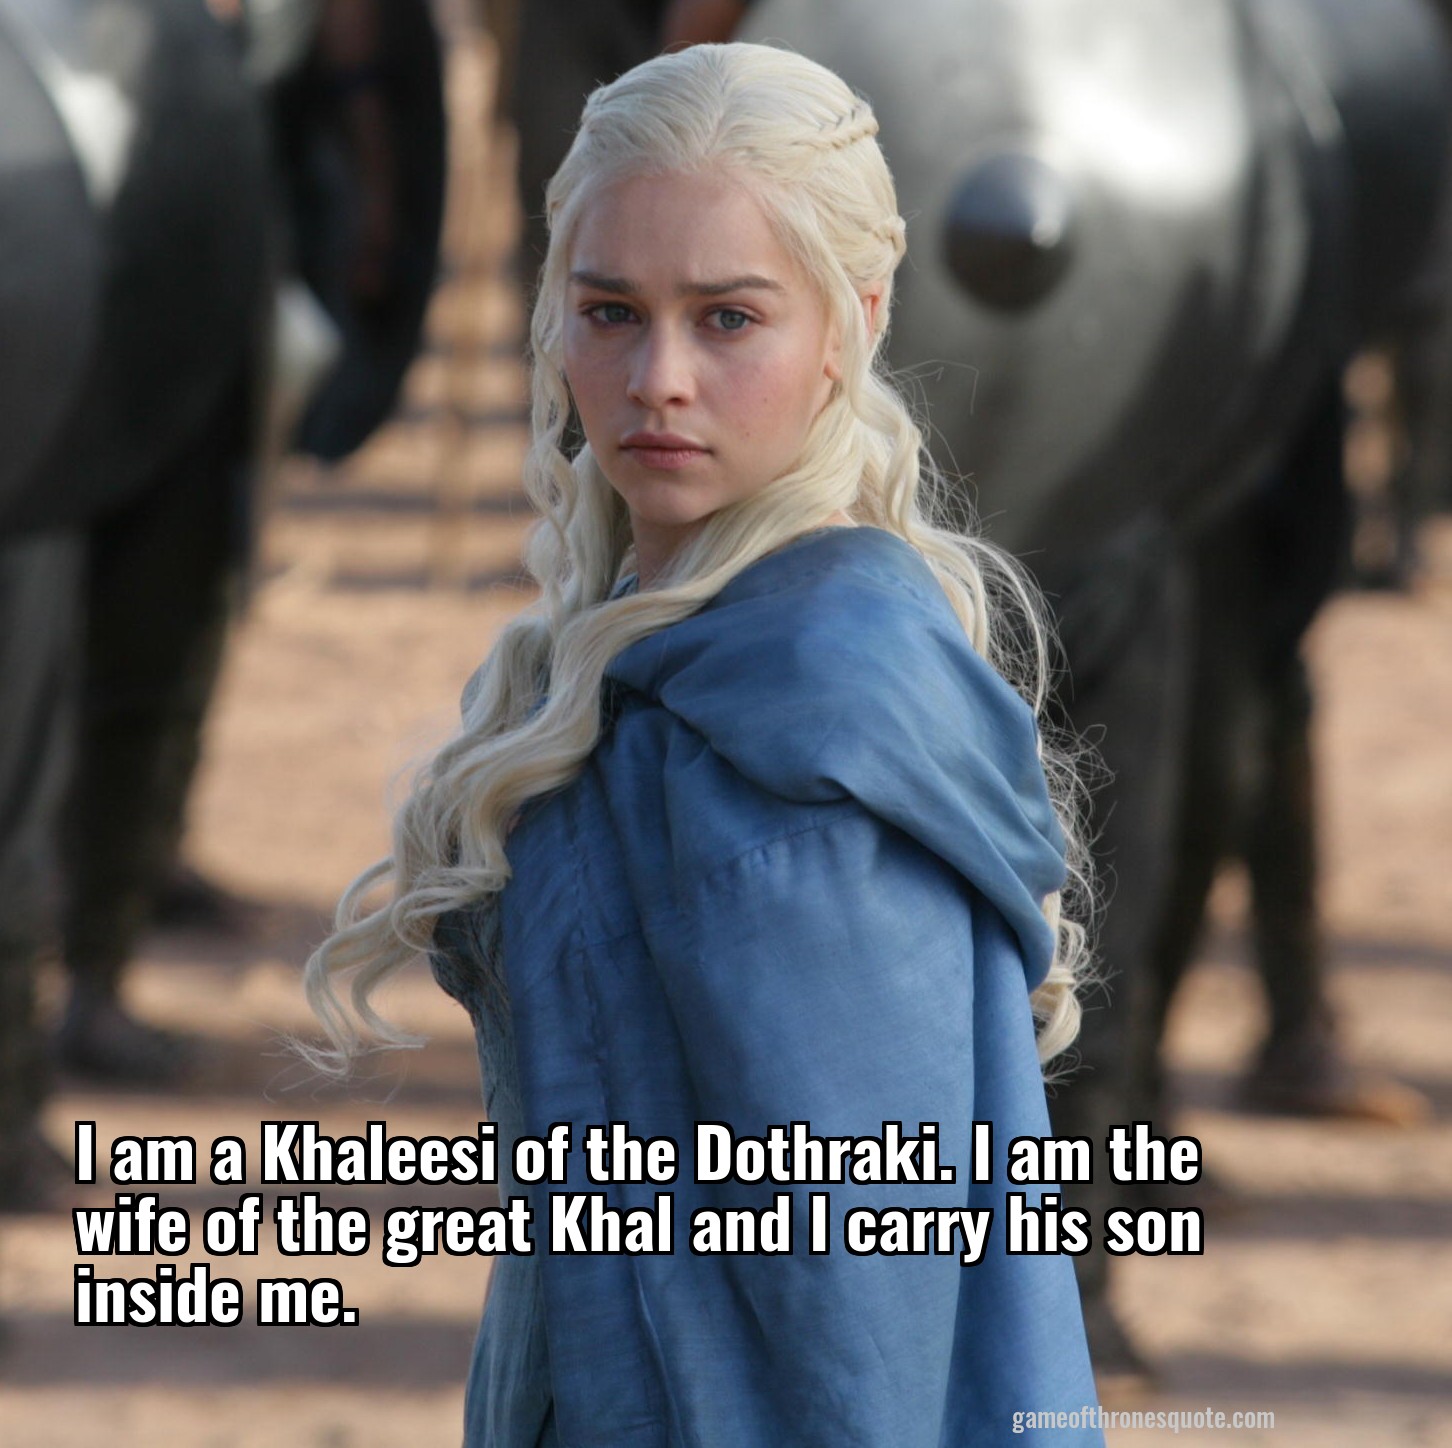 I am a Khaleesi of the Dothraki. I am the wife of the great Khal and I carry his son inside me.